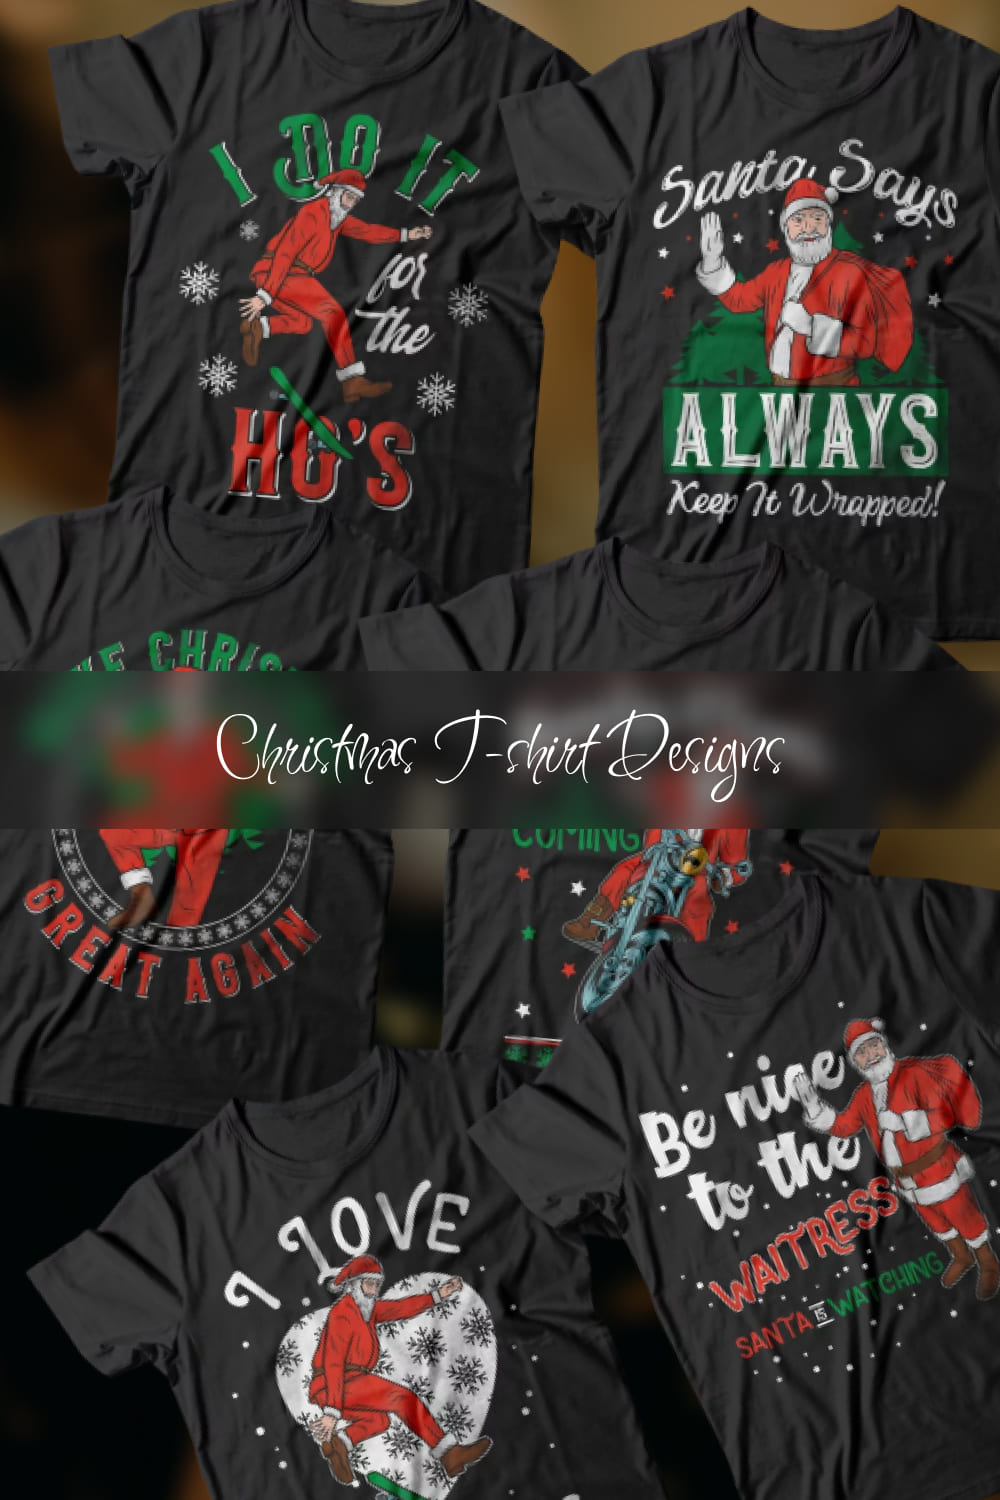 Set of images of black t-shirts with colorful prints of cheerful Santa.